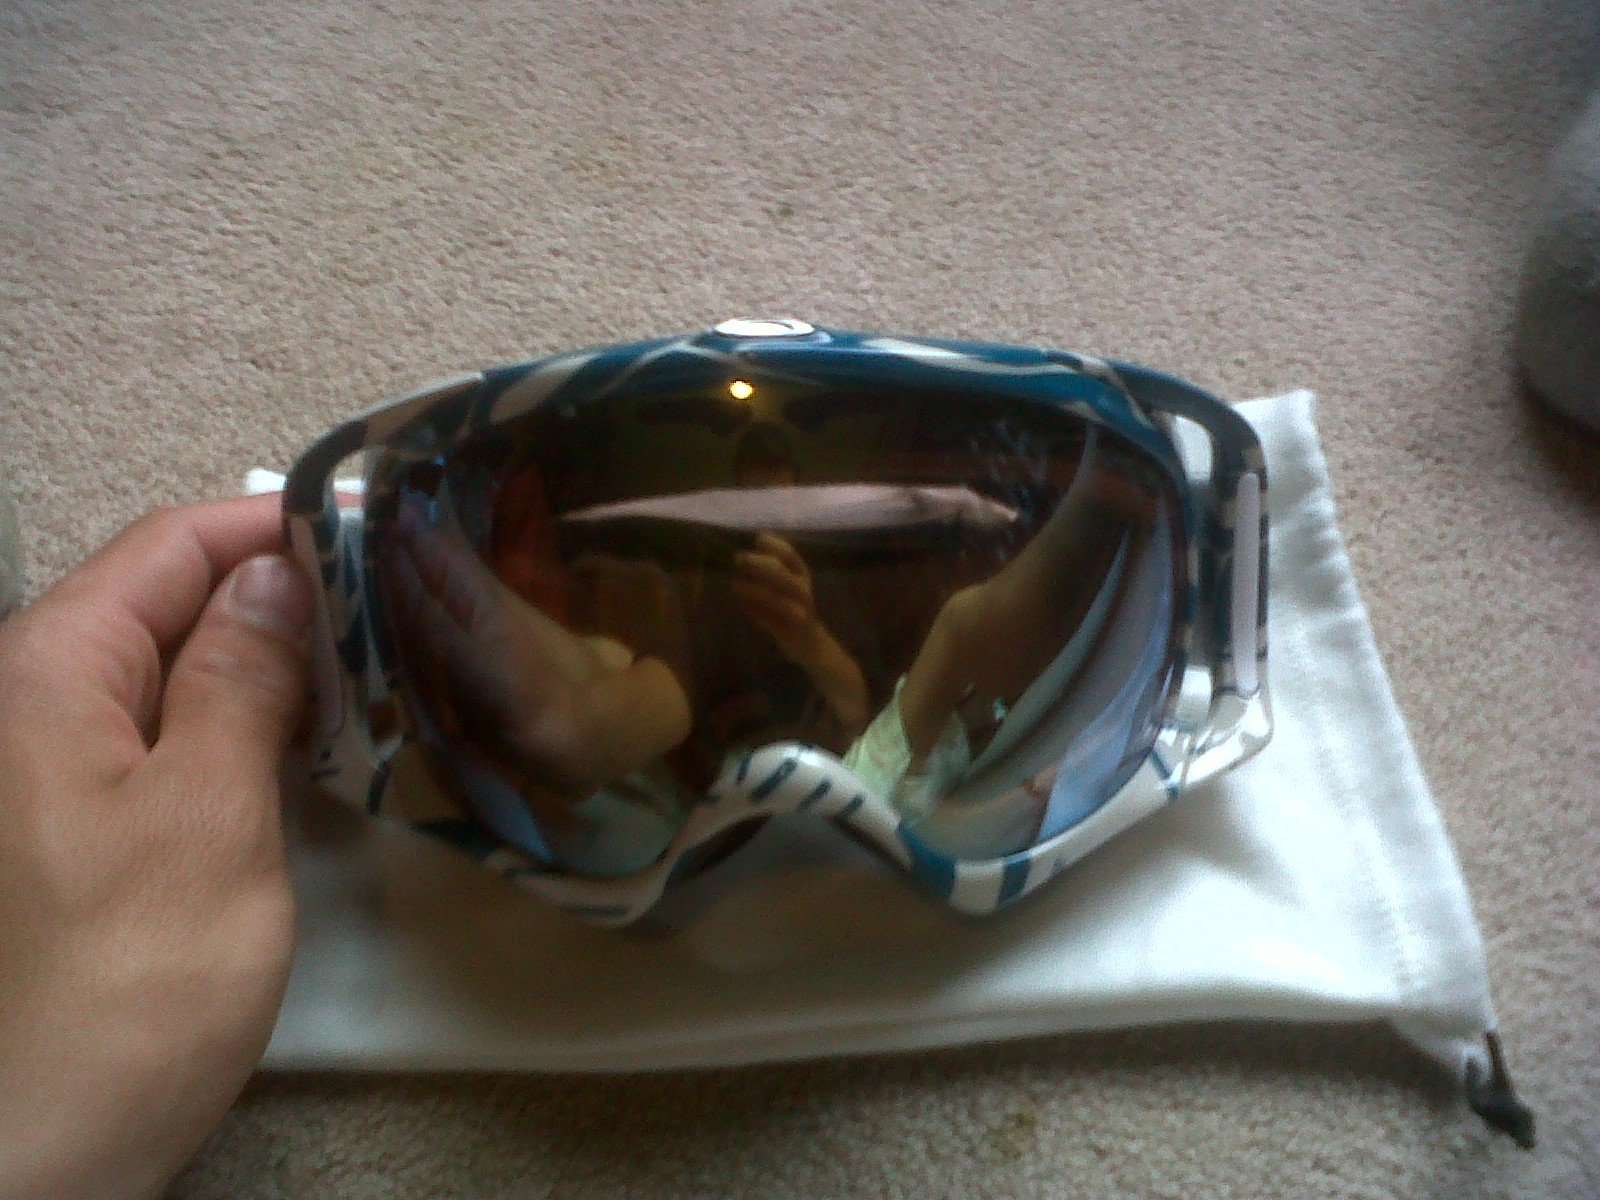 Oakley crowbars for sale, check thread